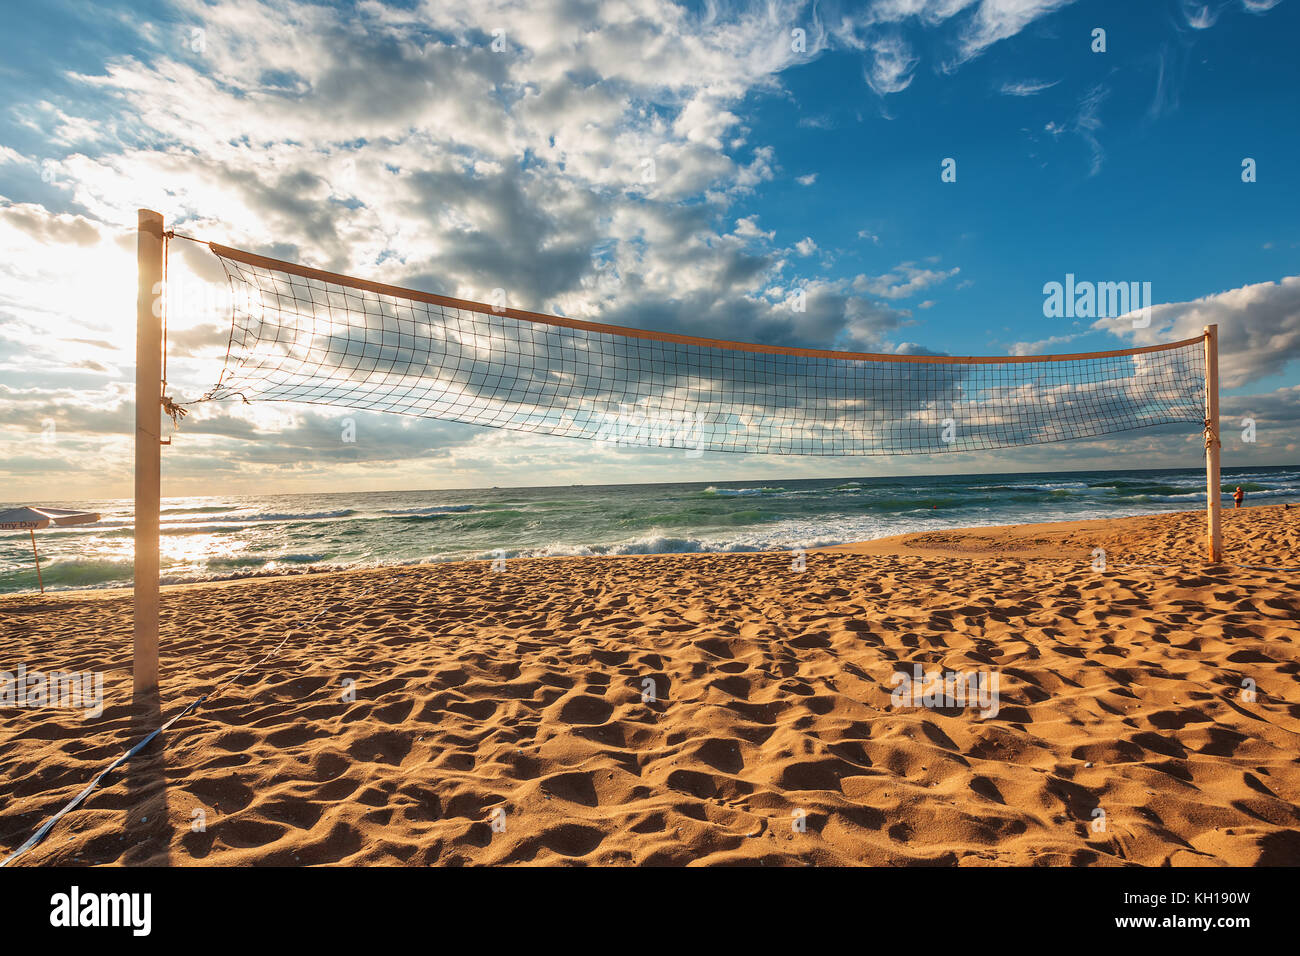 Volleyball net and sunrise on the beach Stock Photo